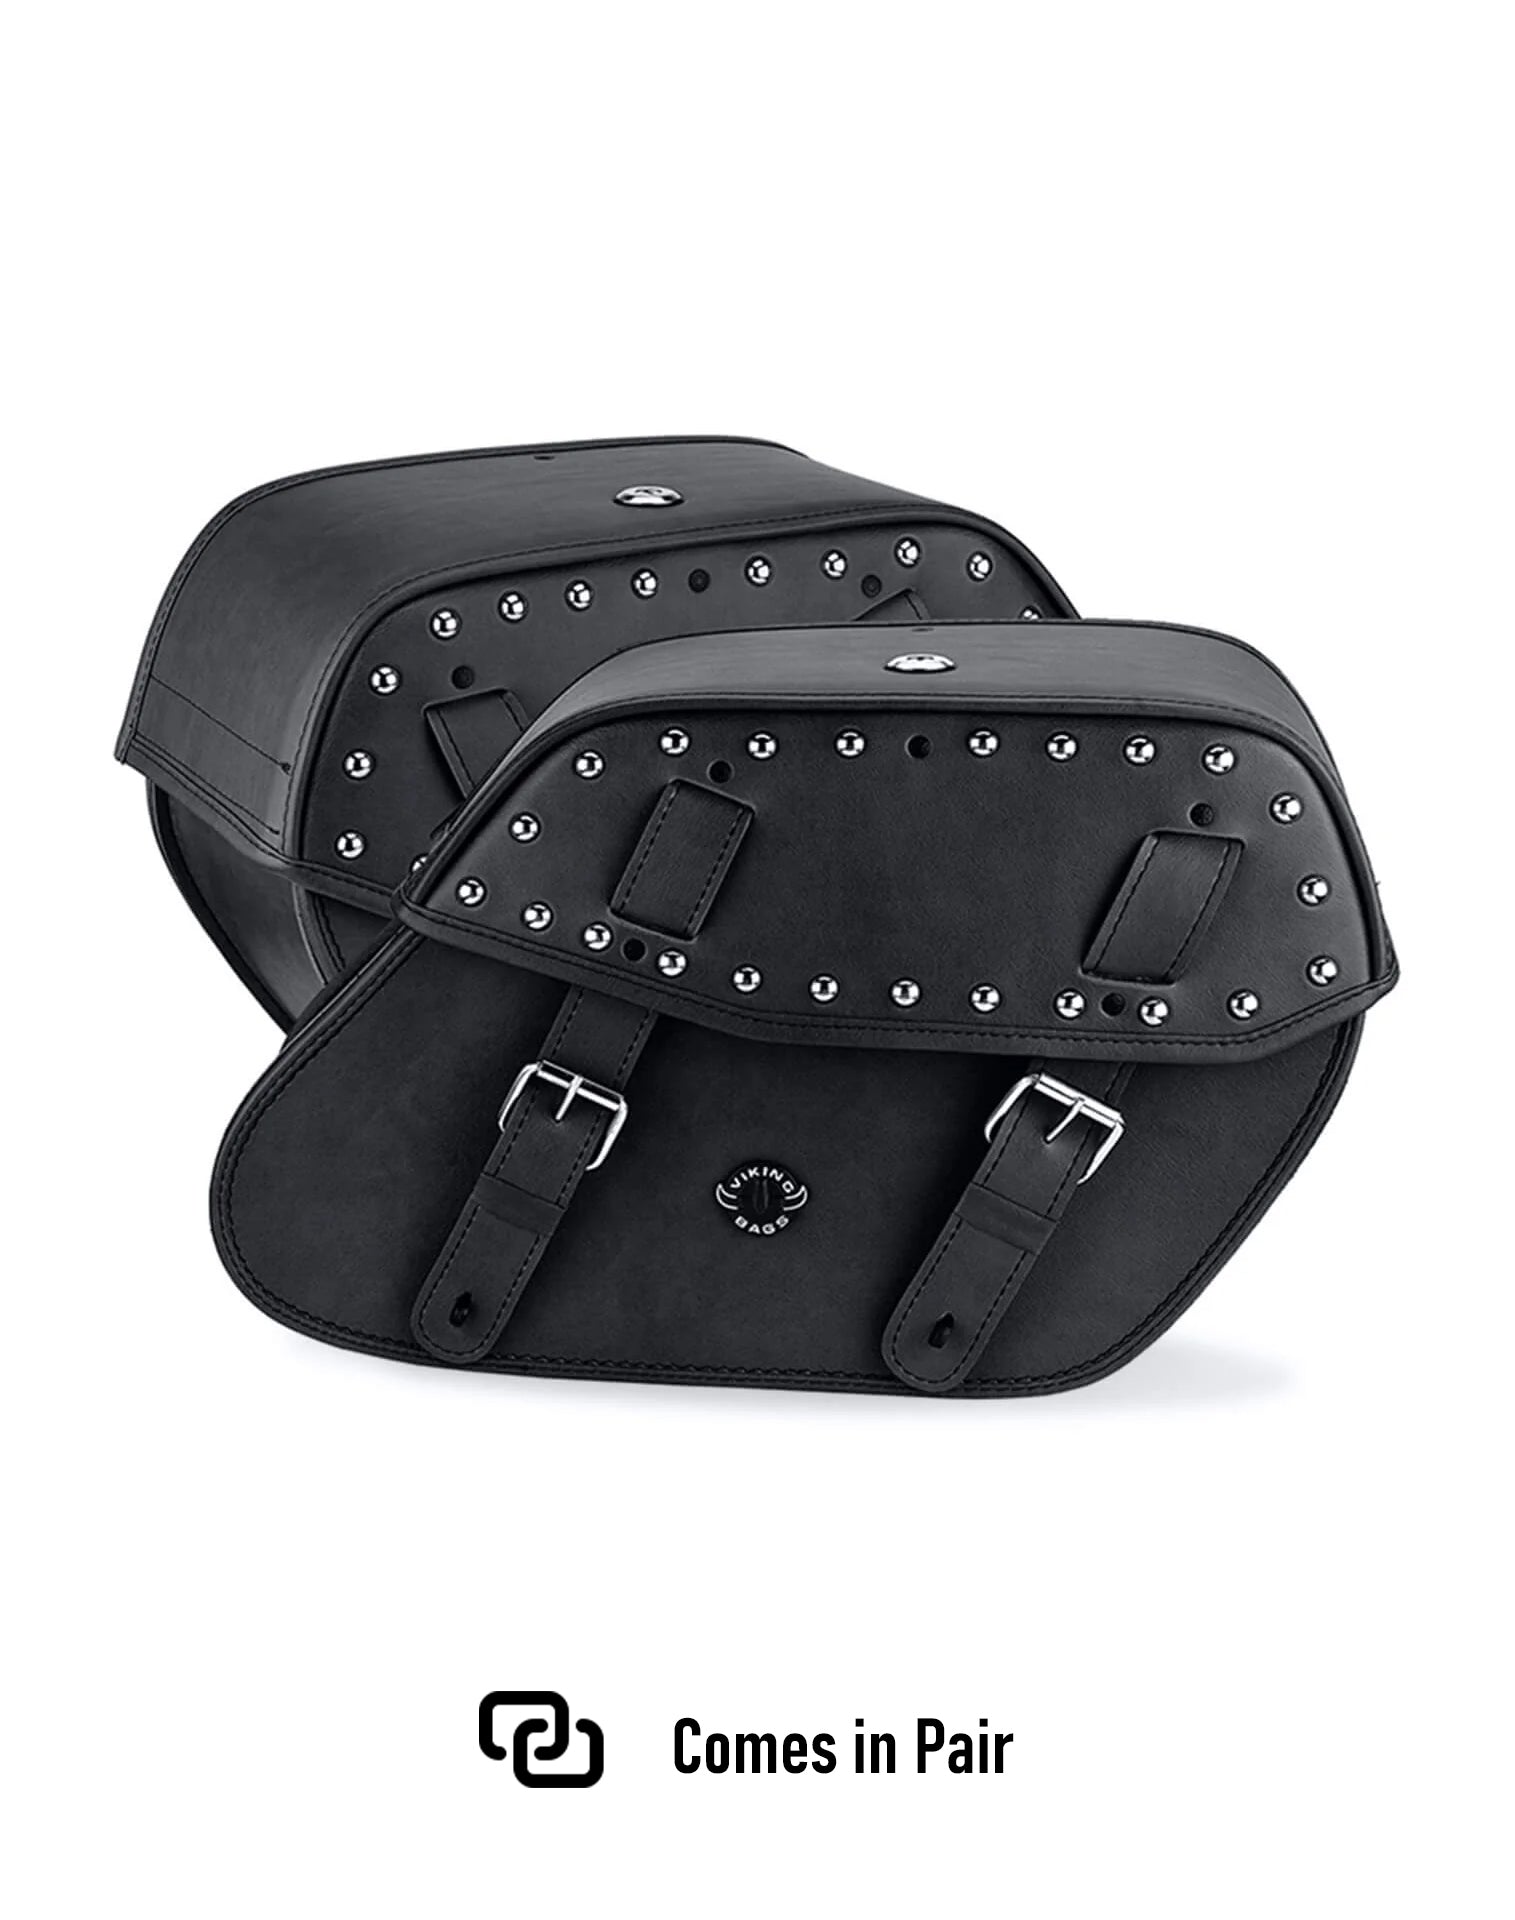 Viking Odin Large Studded Leather Motorcycle Saddlebags For Harley Softail Springer Fxsts I Weather Resistant Bags Comes in Pair